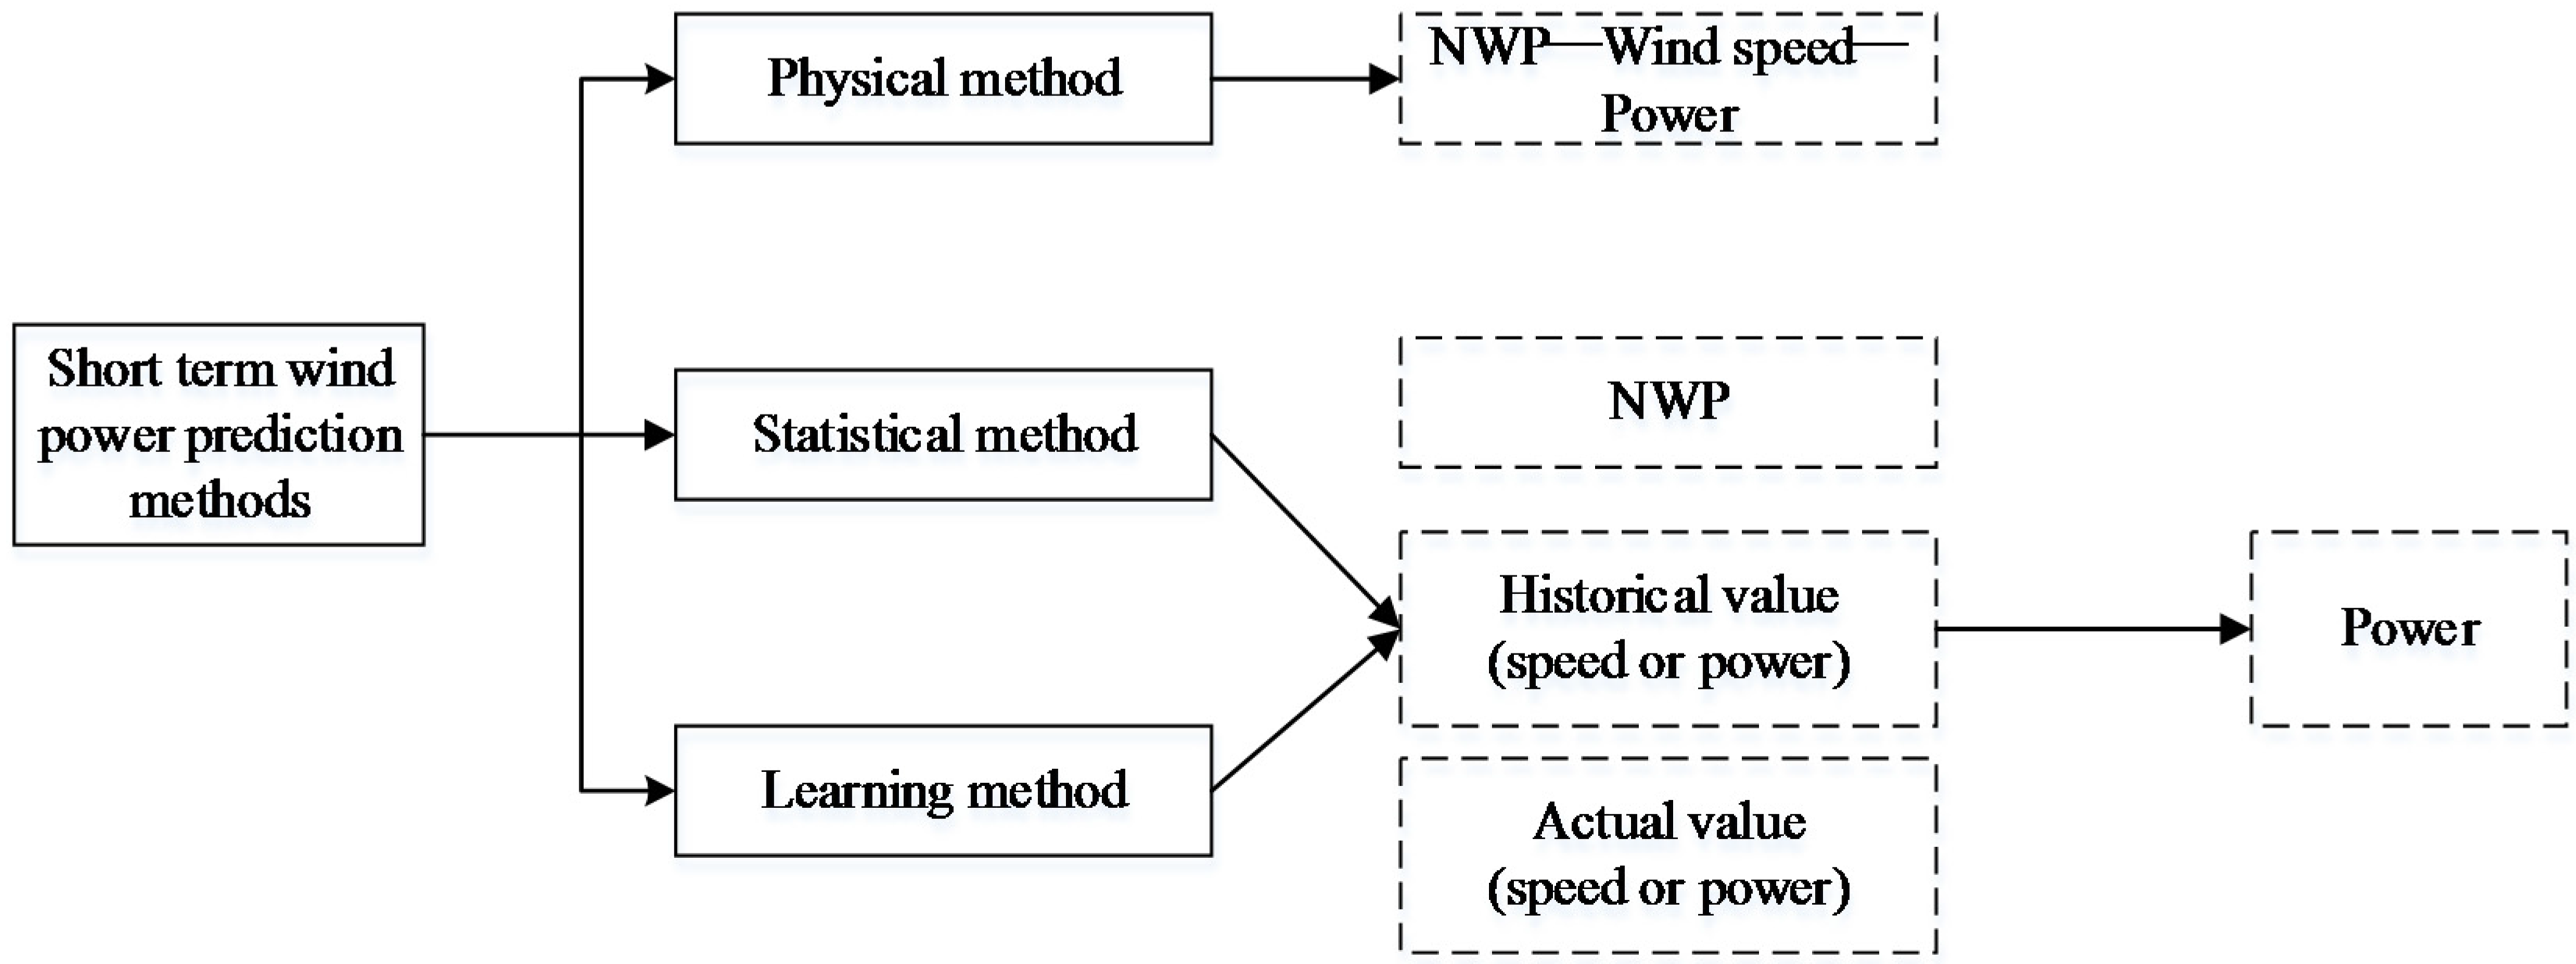 A Critical Review Of Wind Power Forecasting Methods